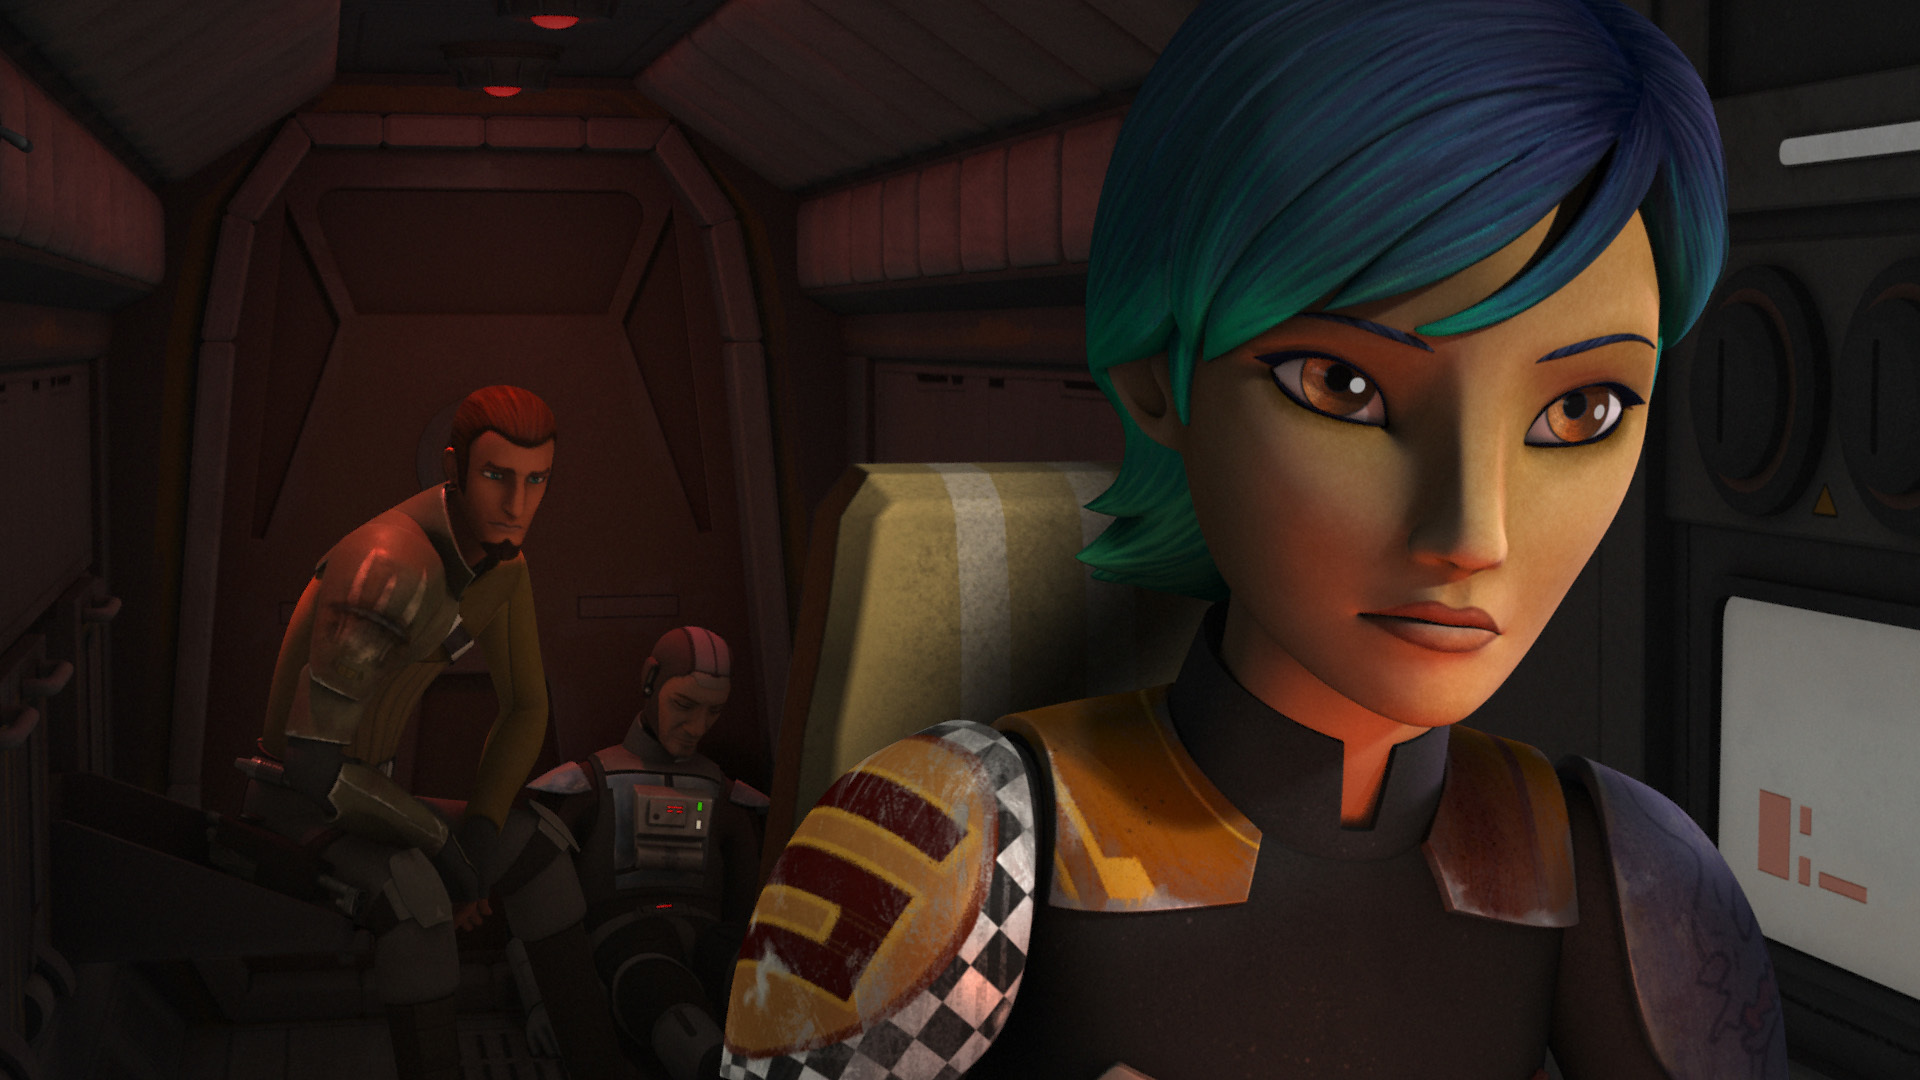 And not because we’re finally getting some more Sabine. 